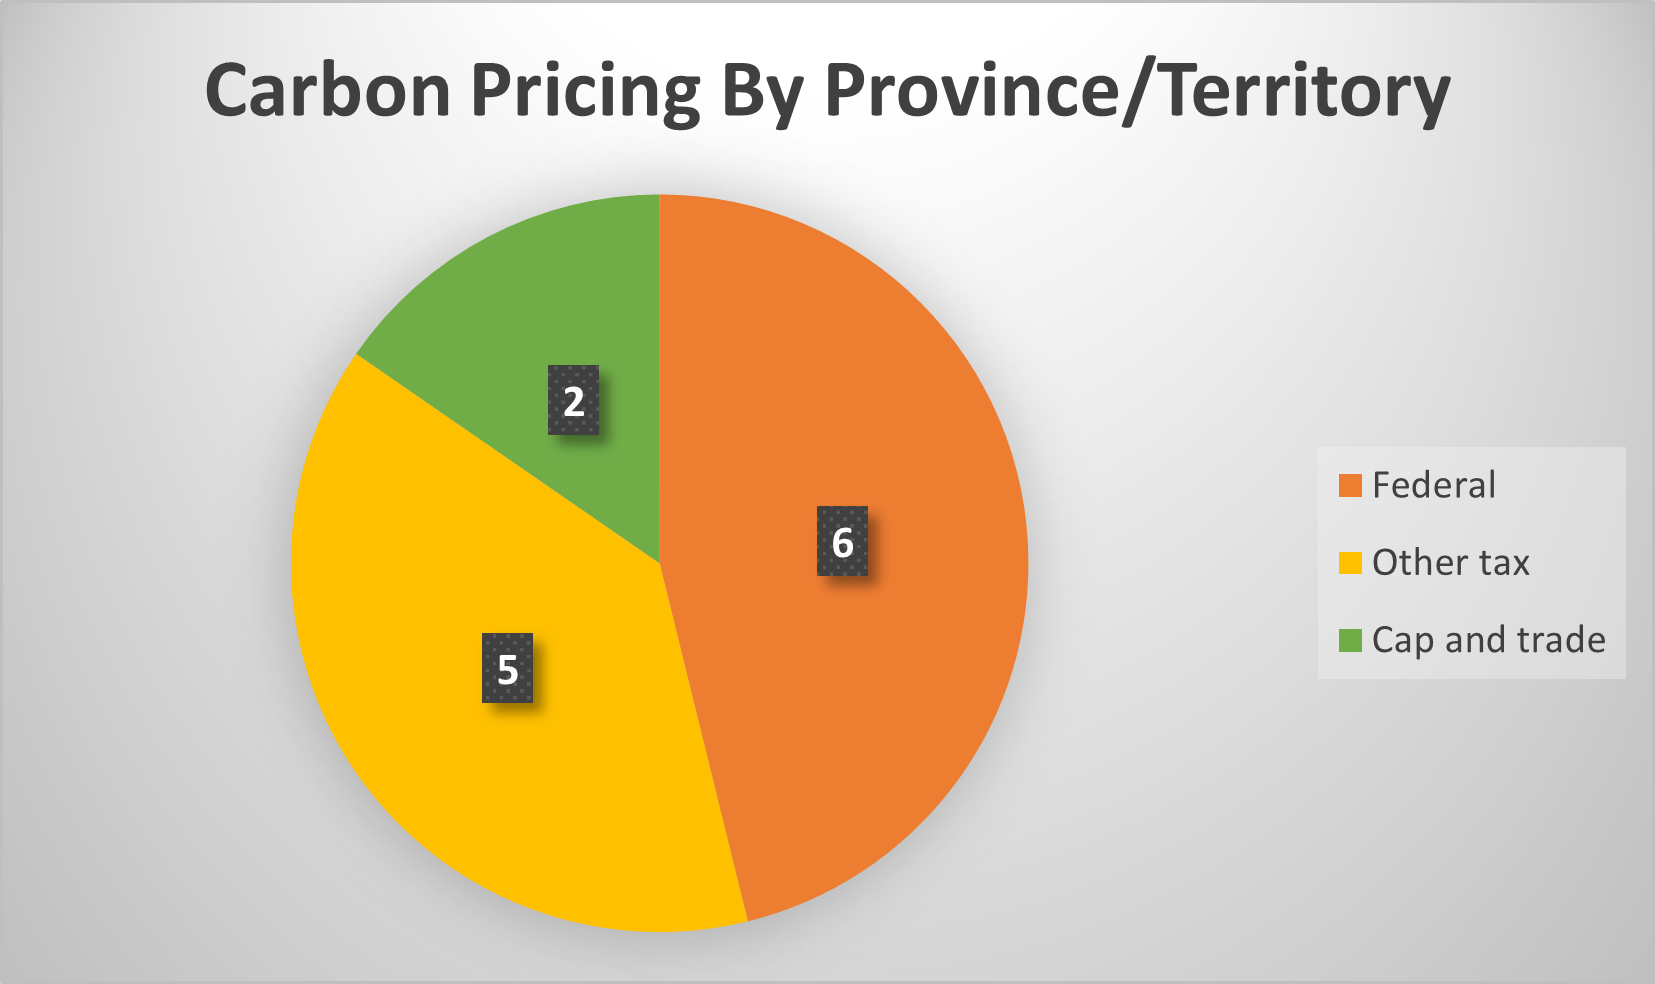 Carbon pricing by province/territory